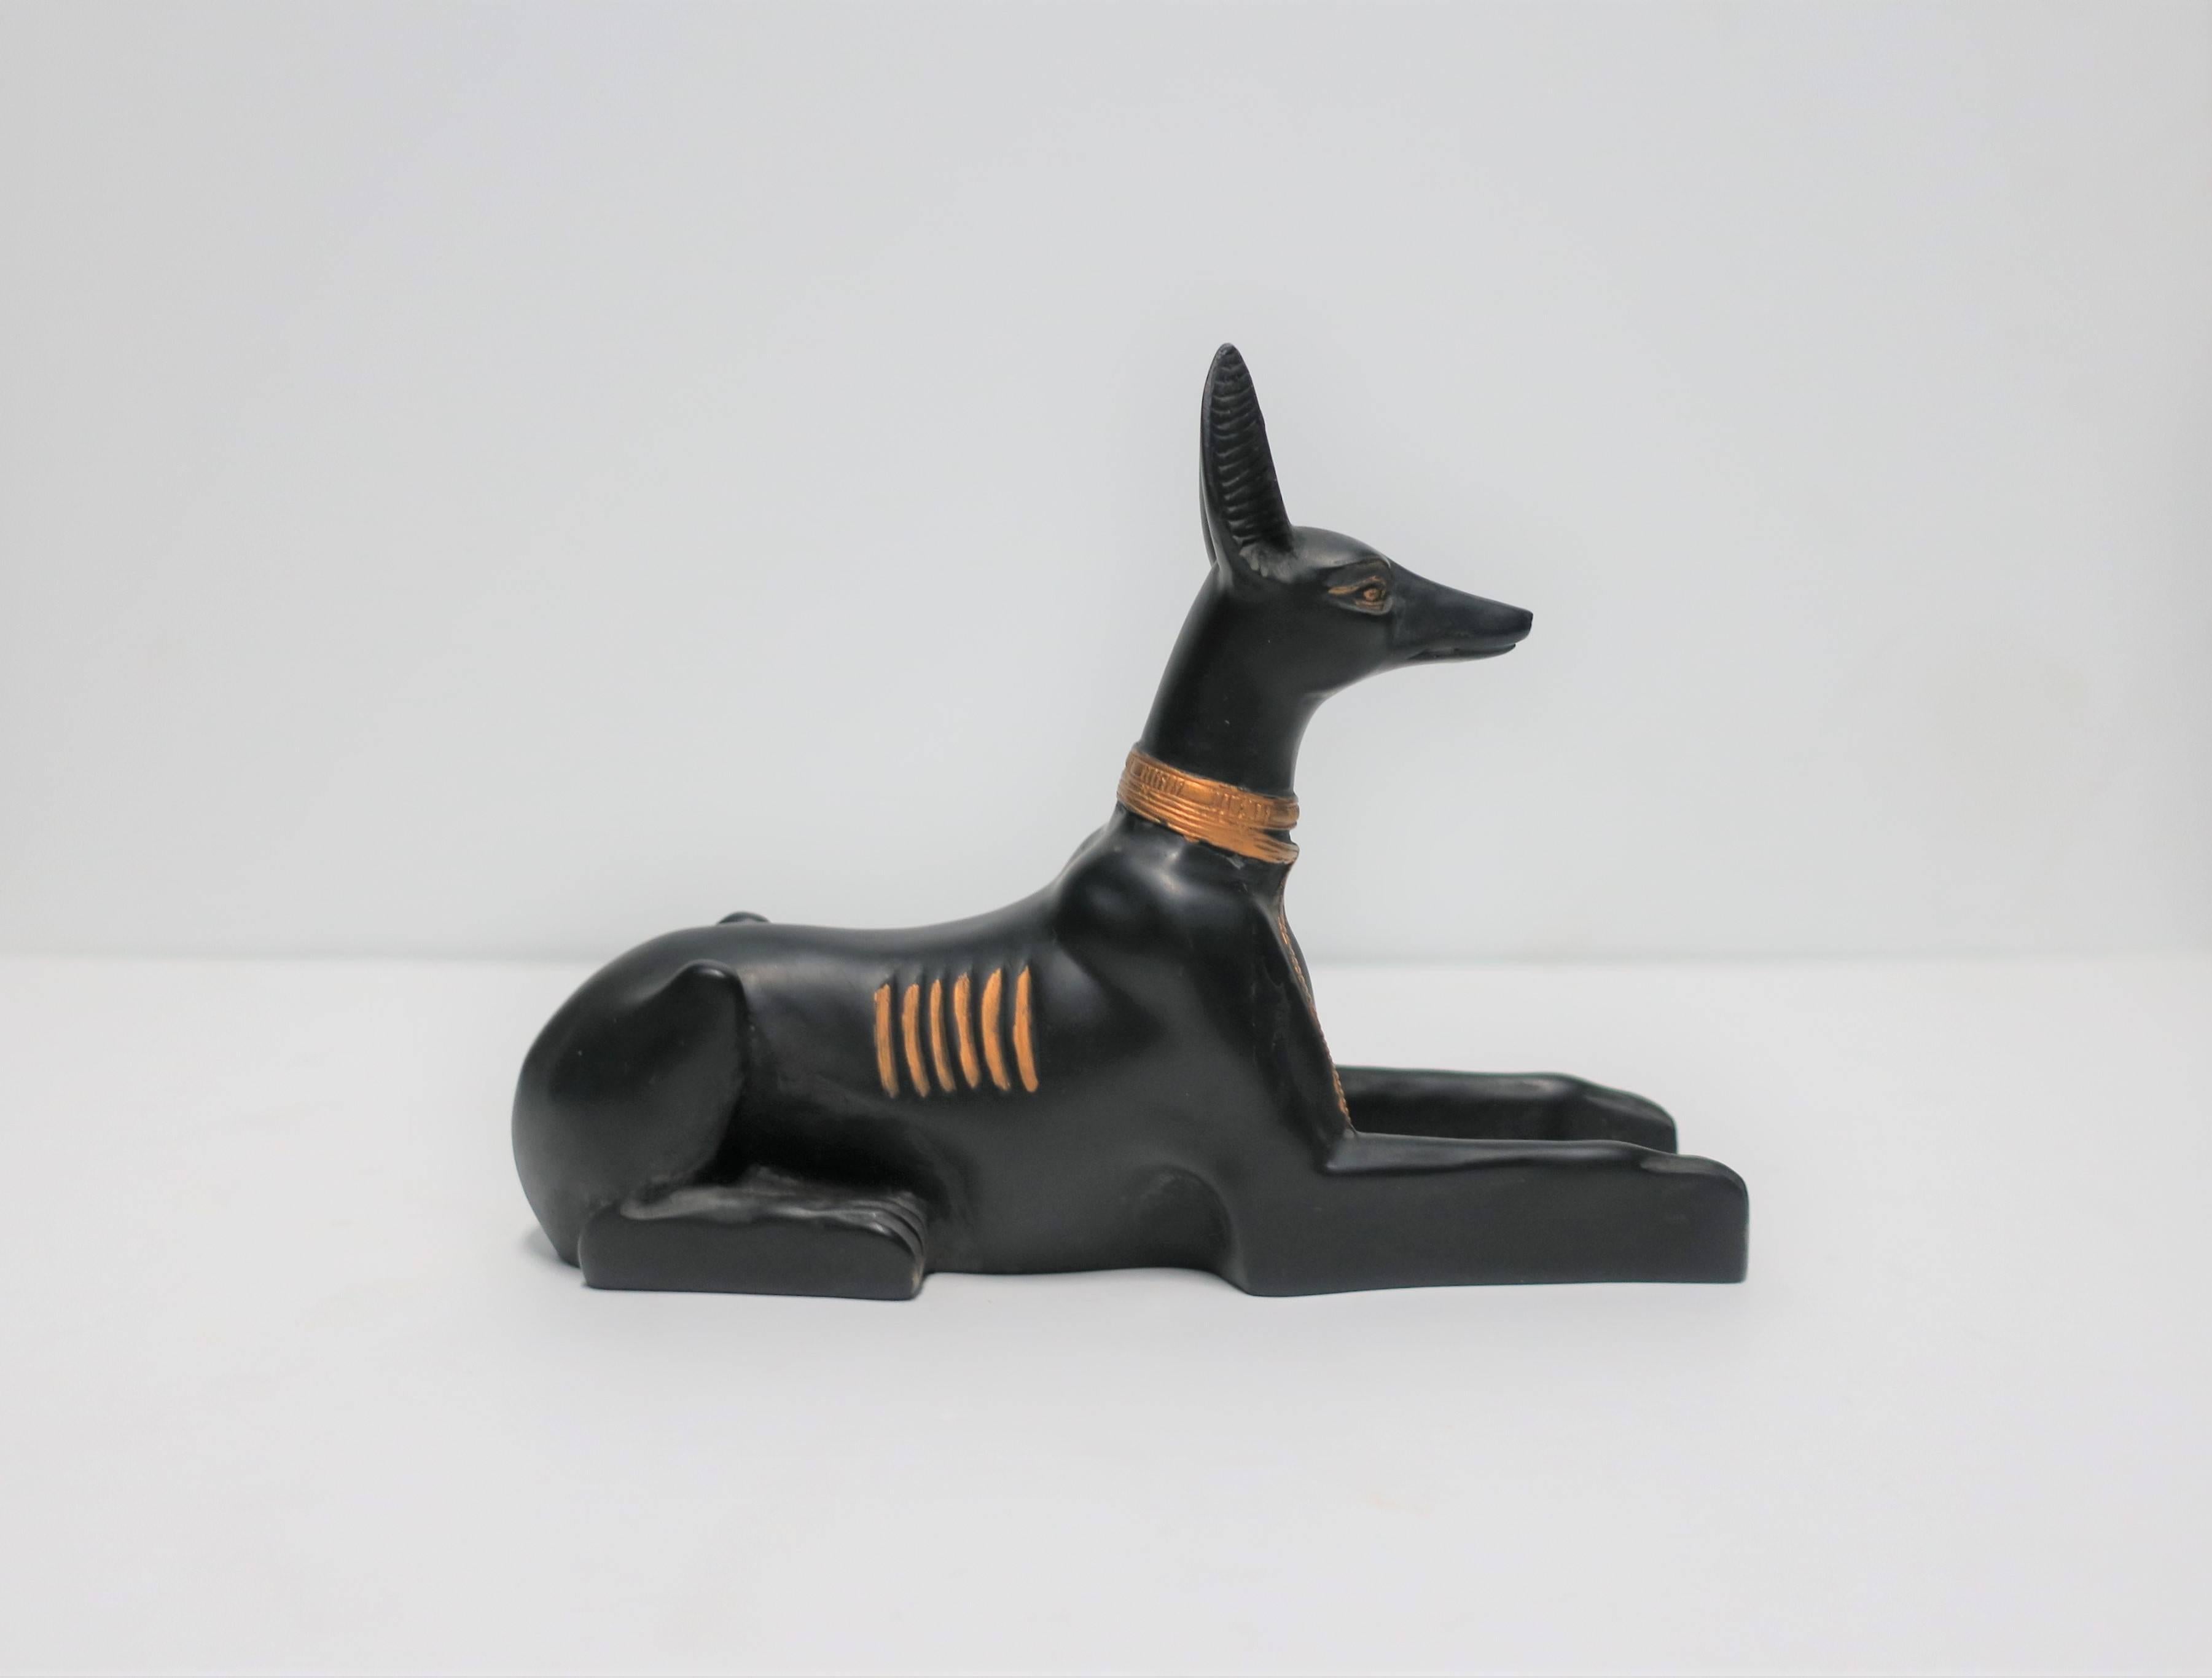 A beautiful and striking vintage black and gold Egyptian 'god' dog sculpture with gold details at neck, ears, eyes and paws. 

Dog measures: 1.75 in. W x 6.25 in. D x 4.75 in. H

